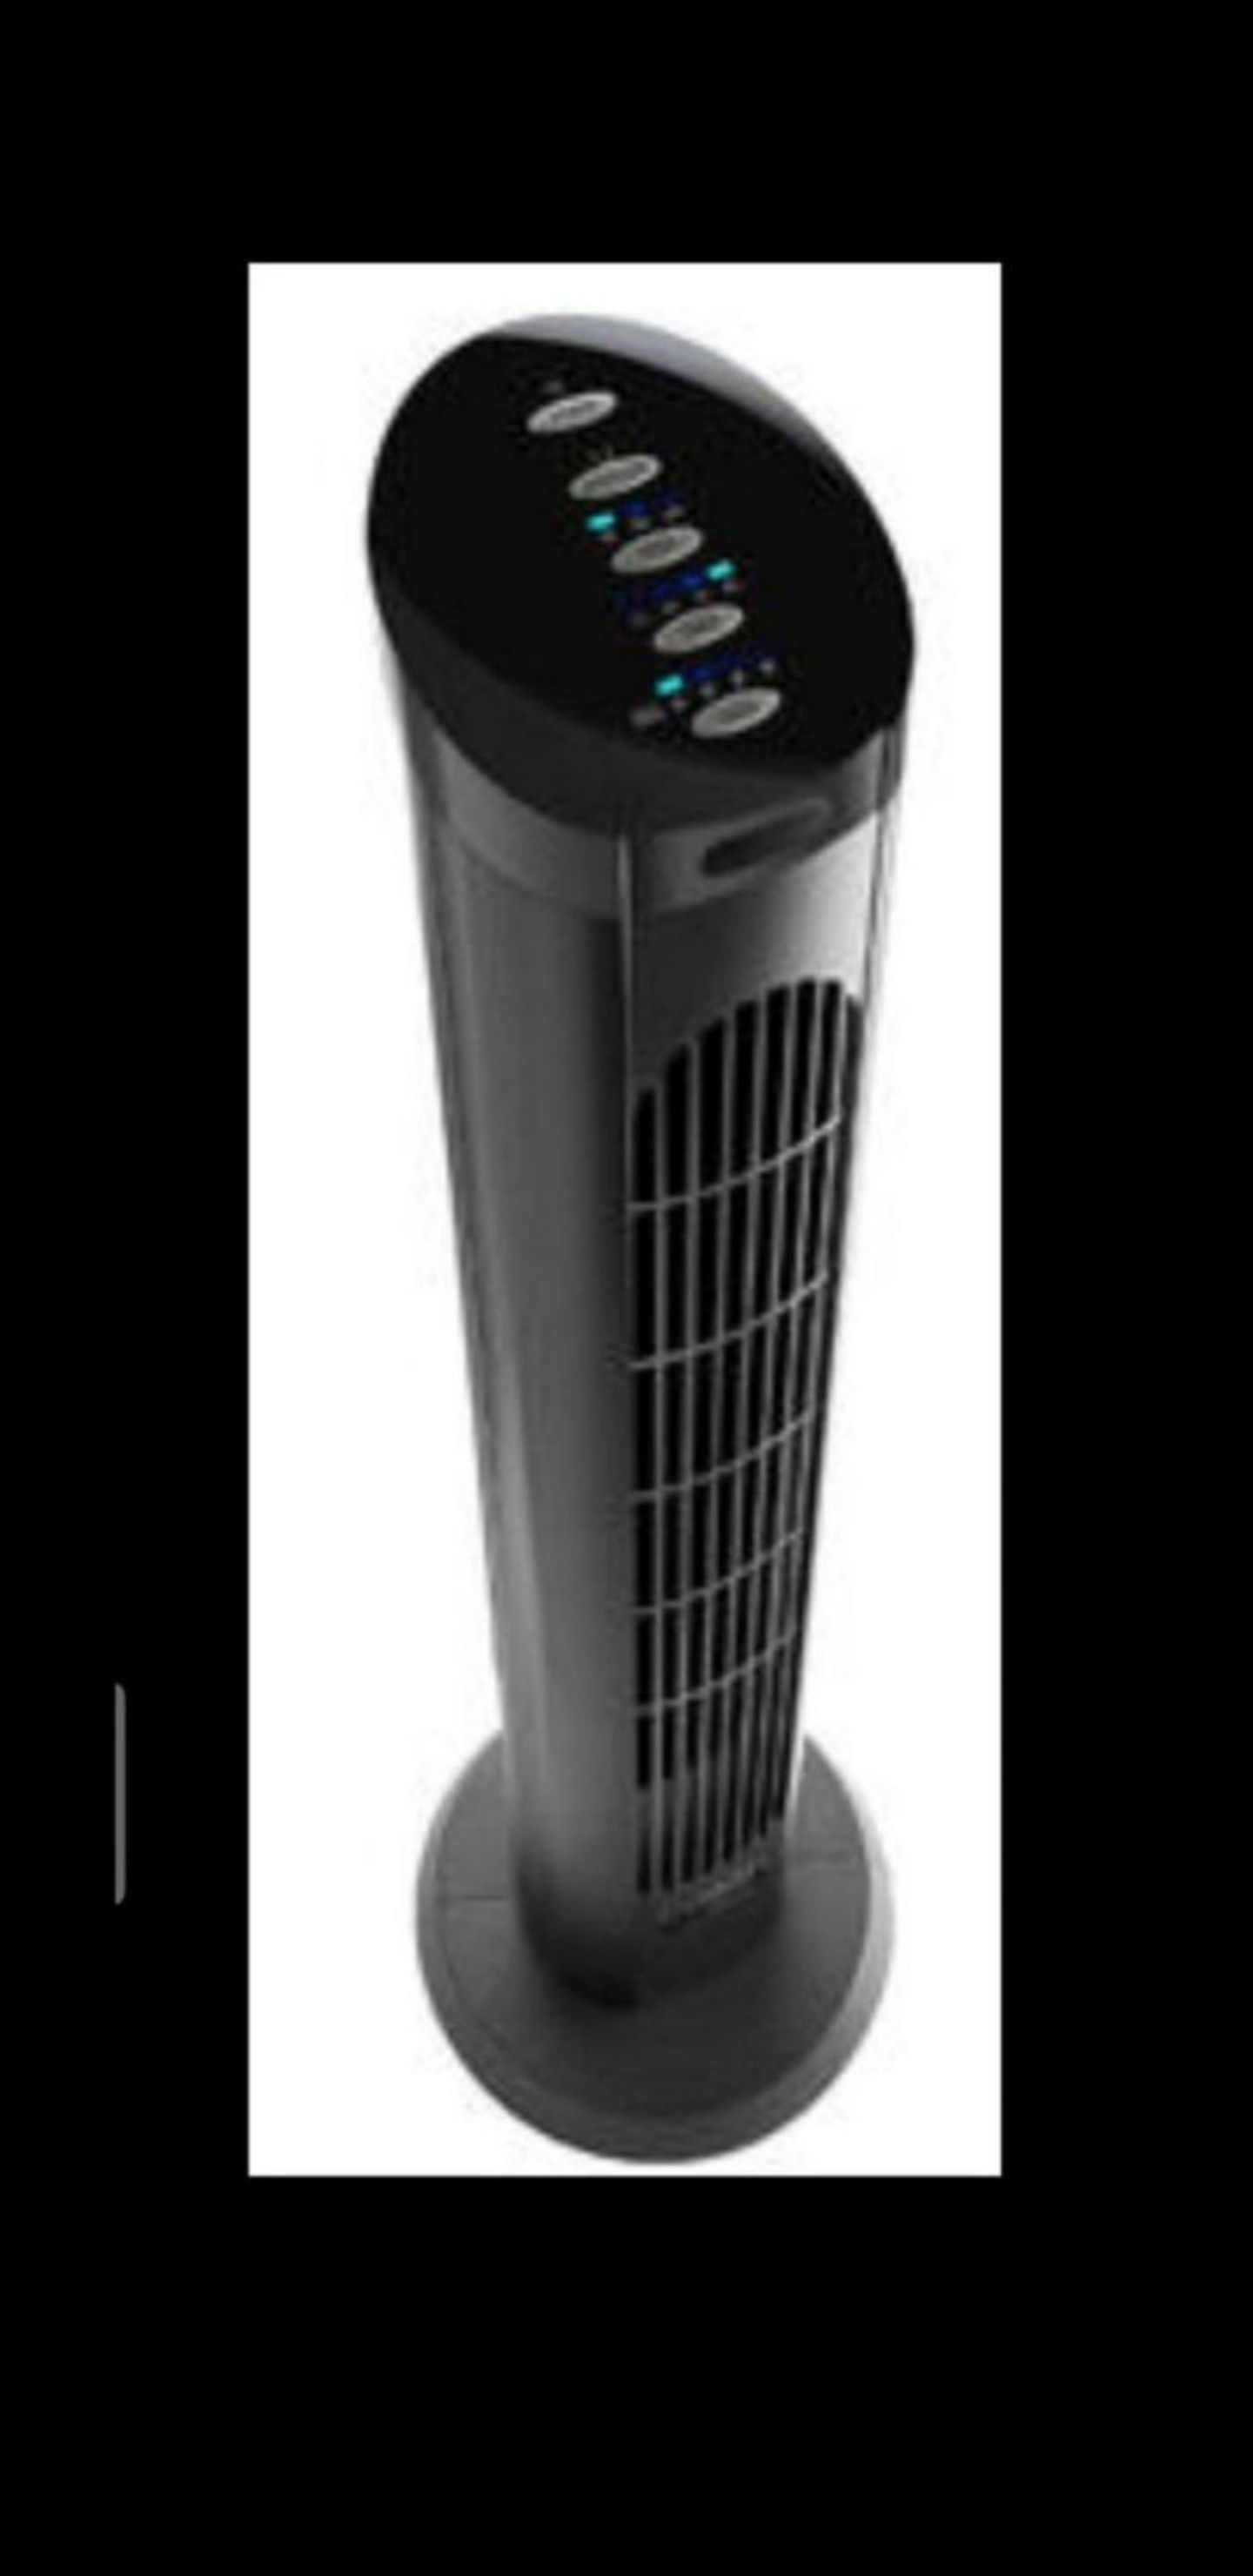 NEW in box Namebrand Tower Fan 40 inches tall with Remote, Timer, Oscillating, 4 speeds